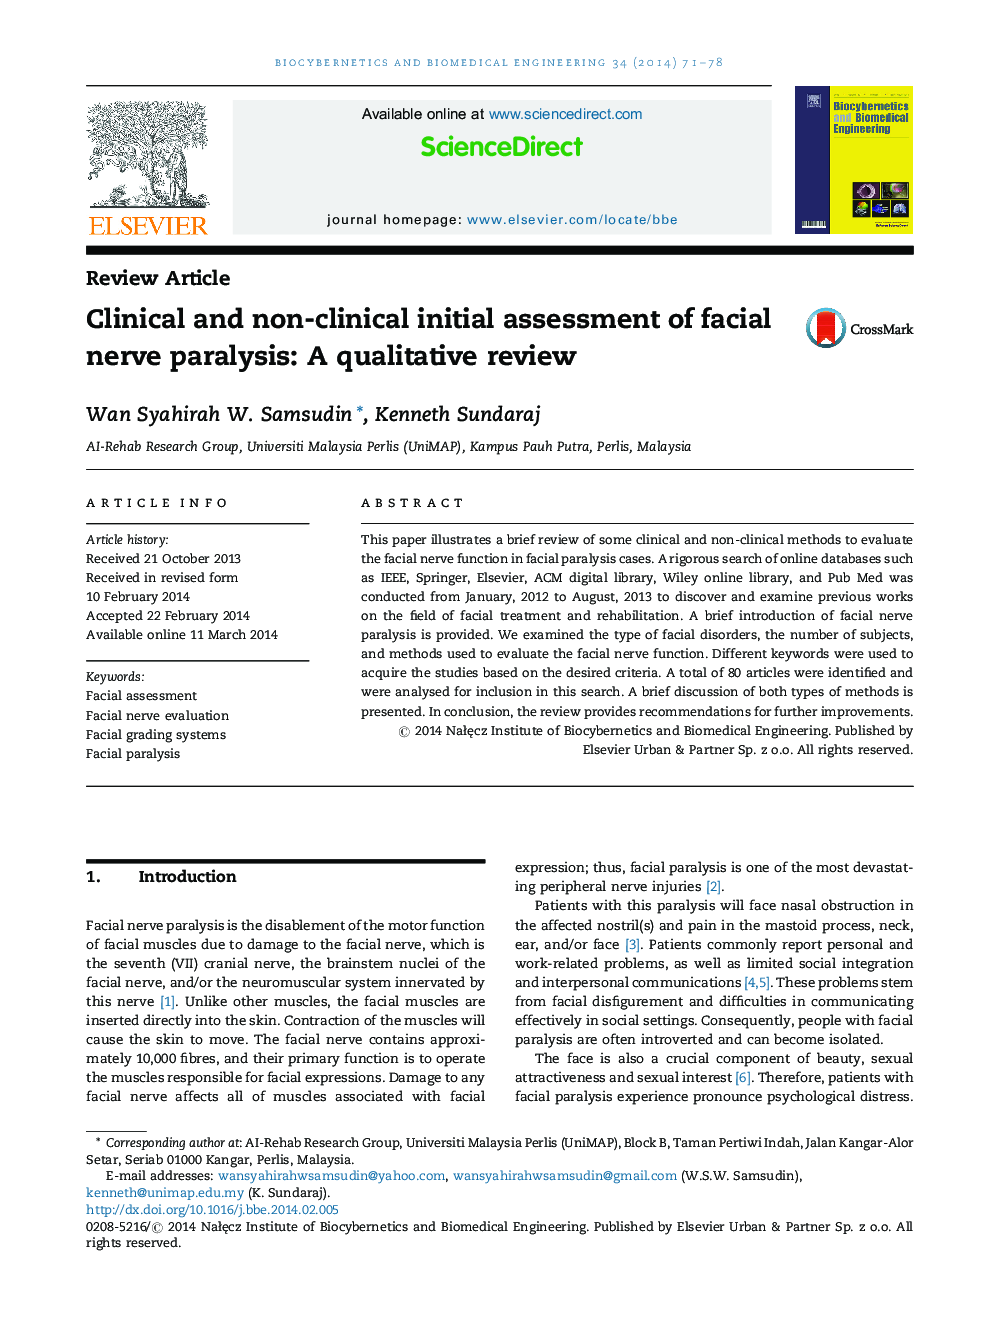 Clinical and non-clinical initial assessment of facial nerve paralysis: A qualitative review